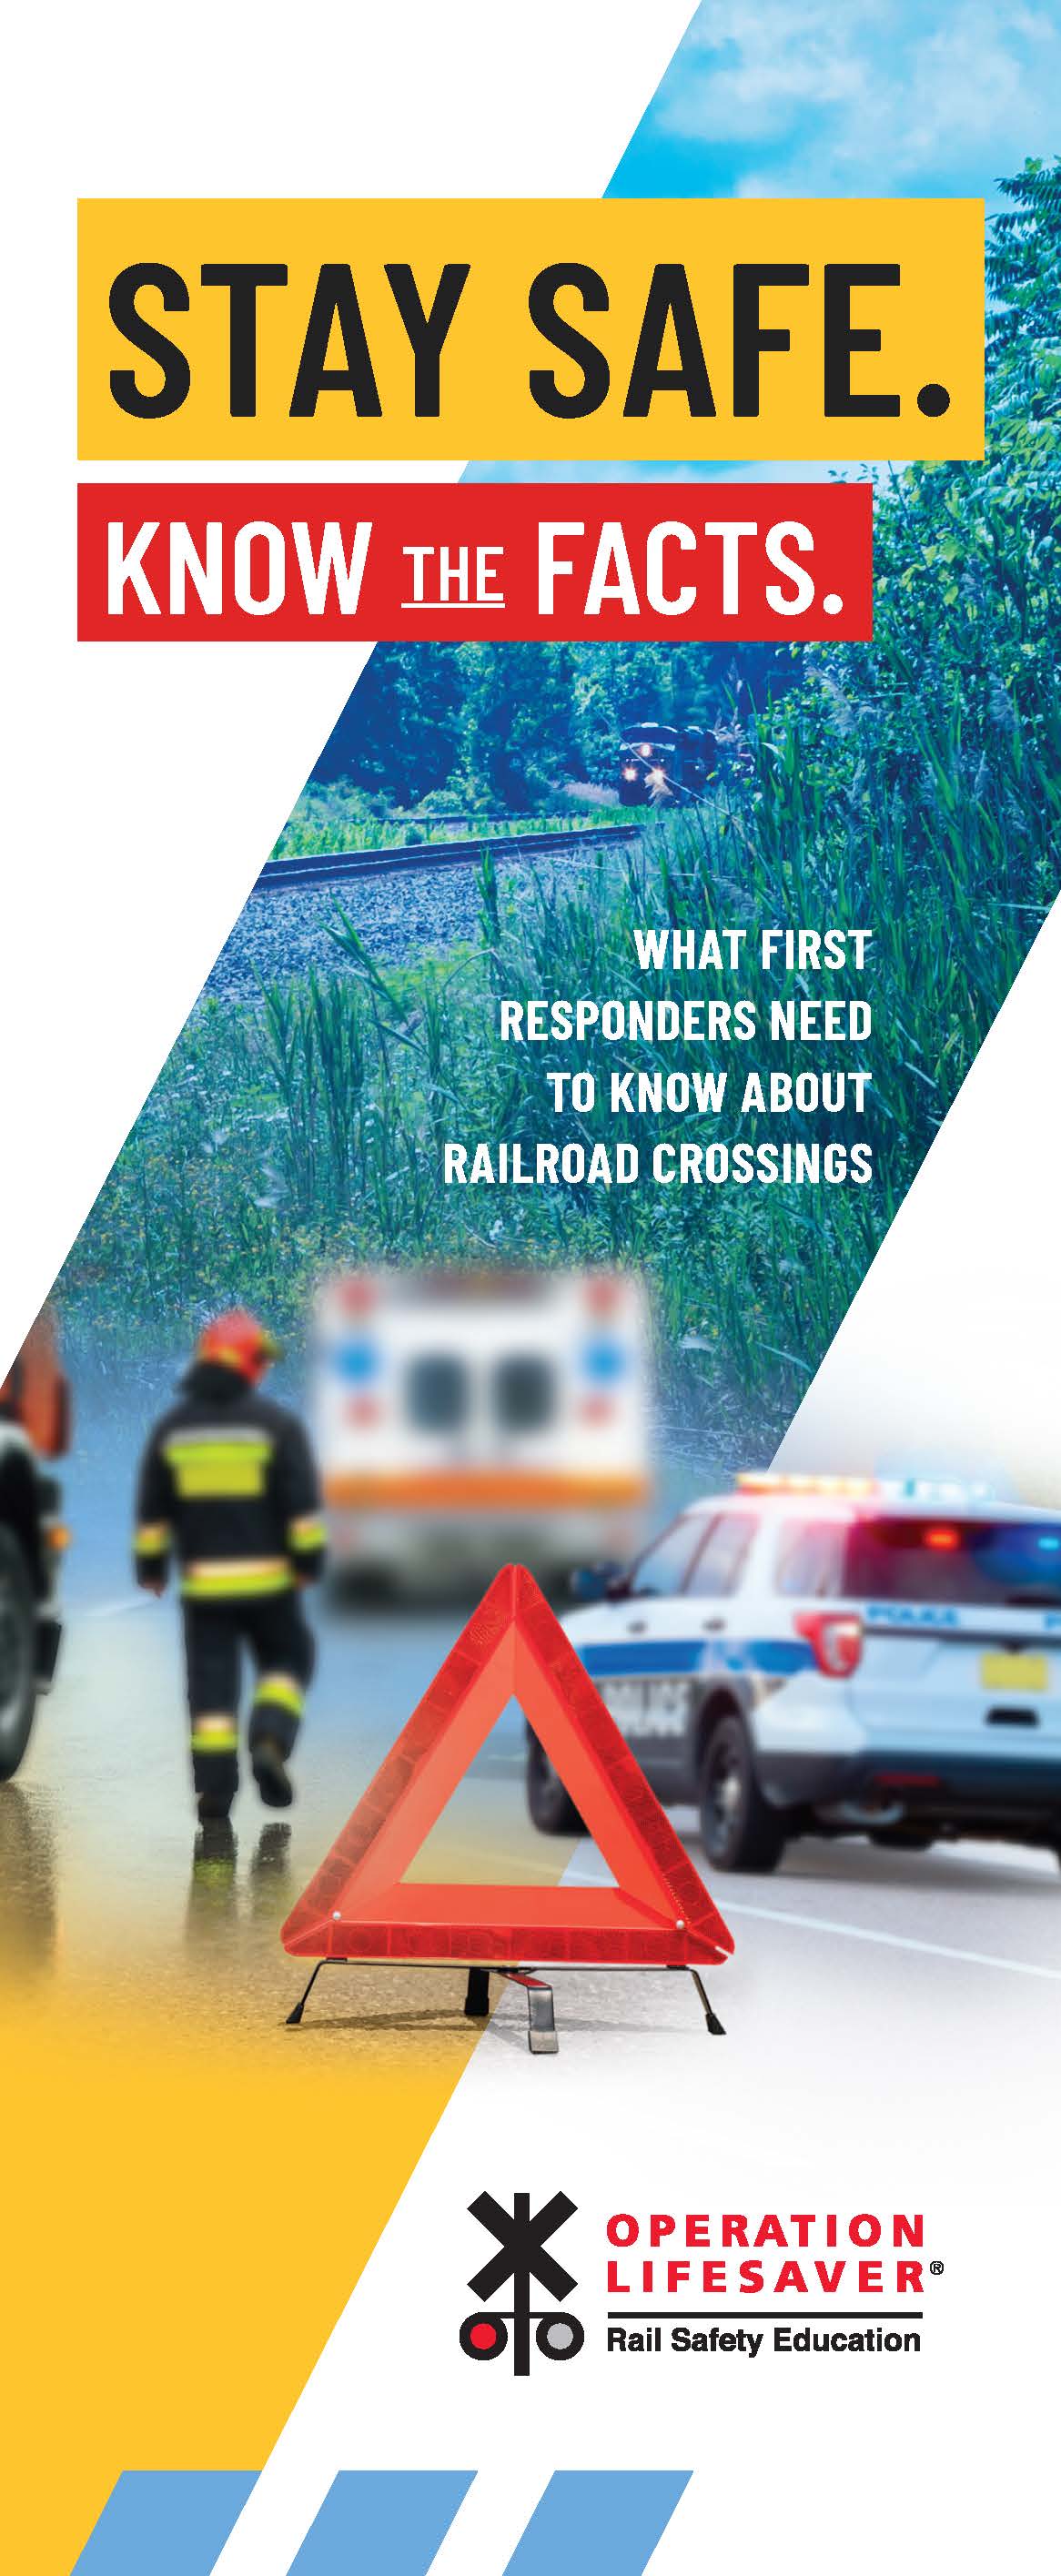 First Responders: Stay Safe. Know the Facts.